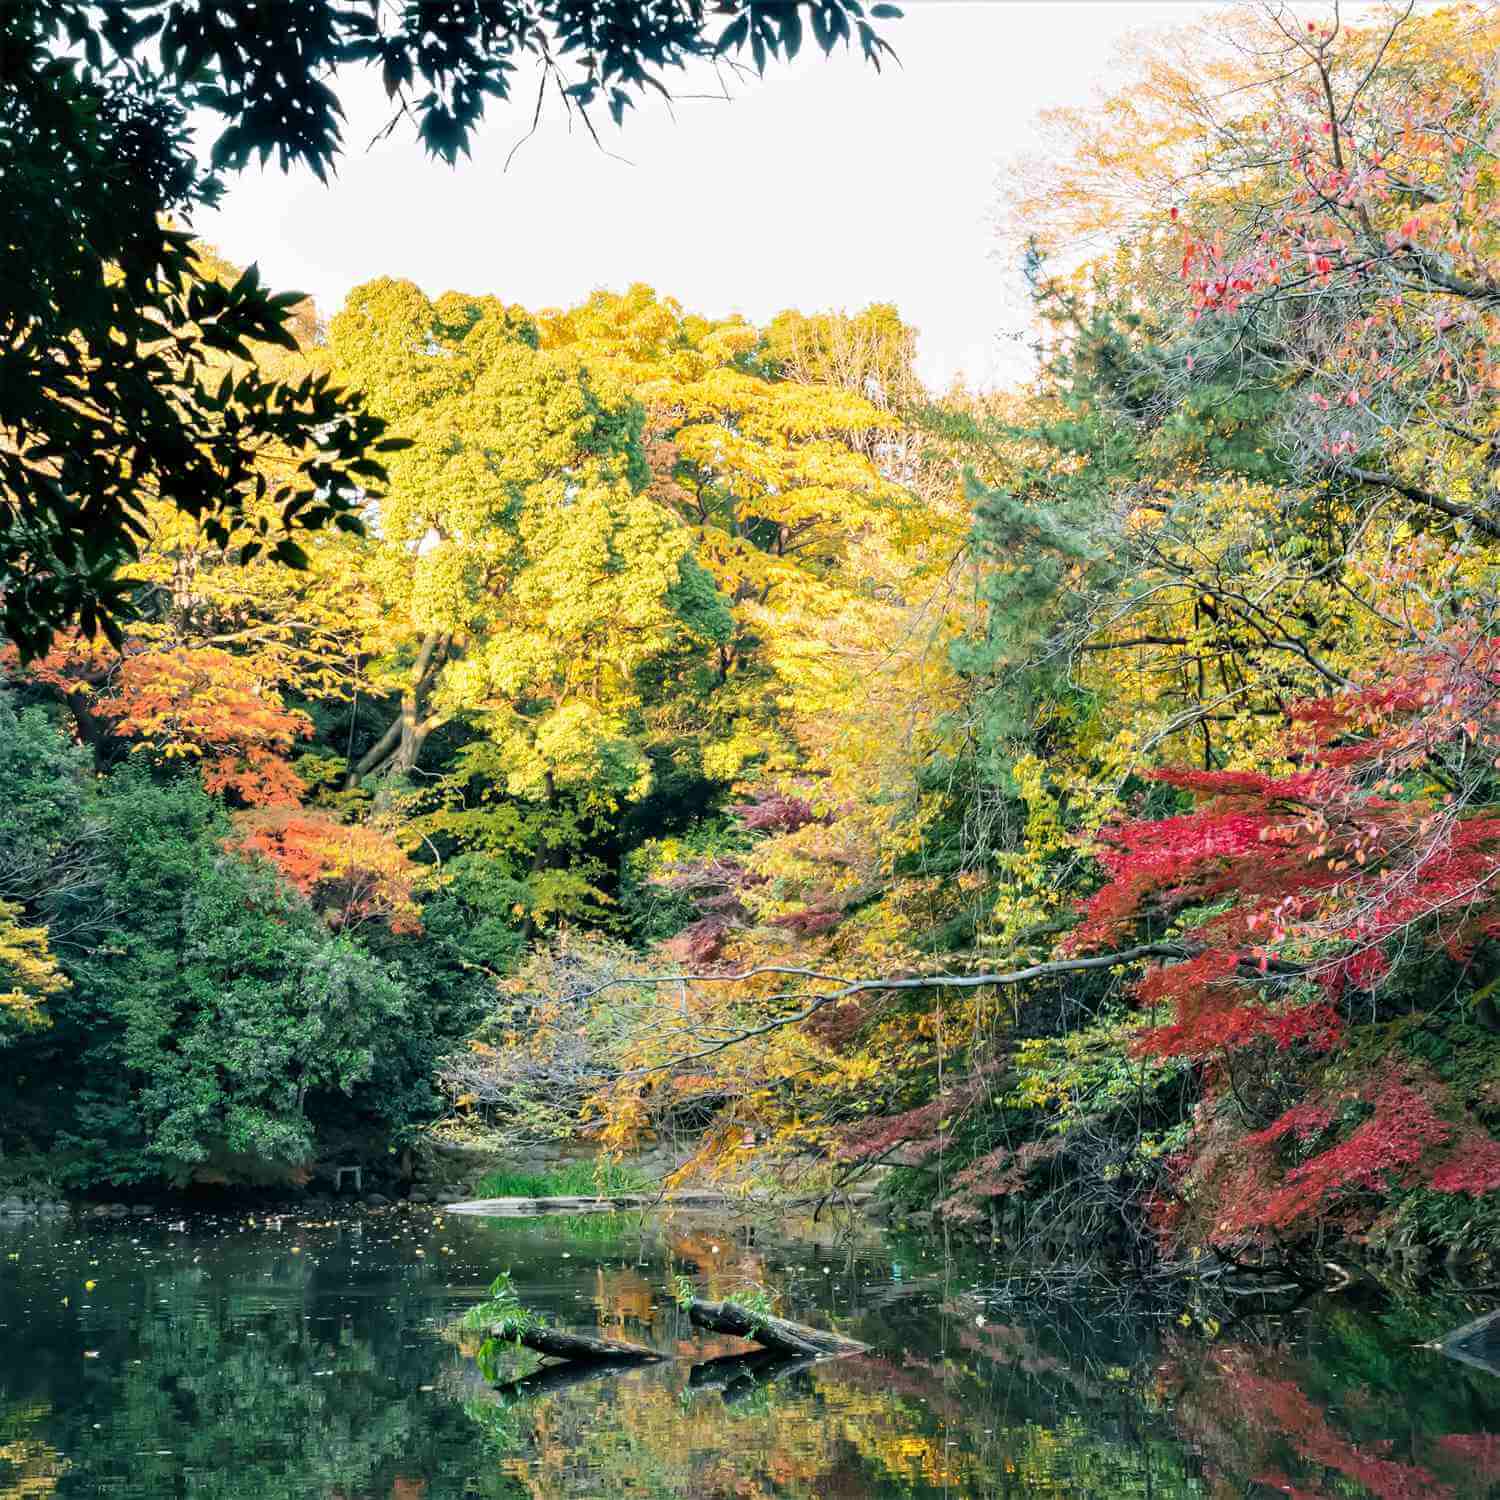 The Hongo campus of the University of Tokyo has beautiful autumn leaves in November, Tokyo = Shutterstock 8